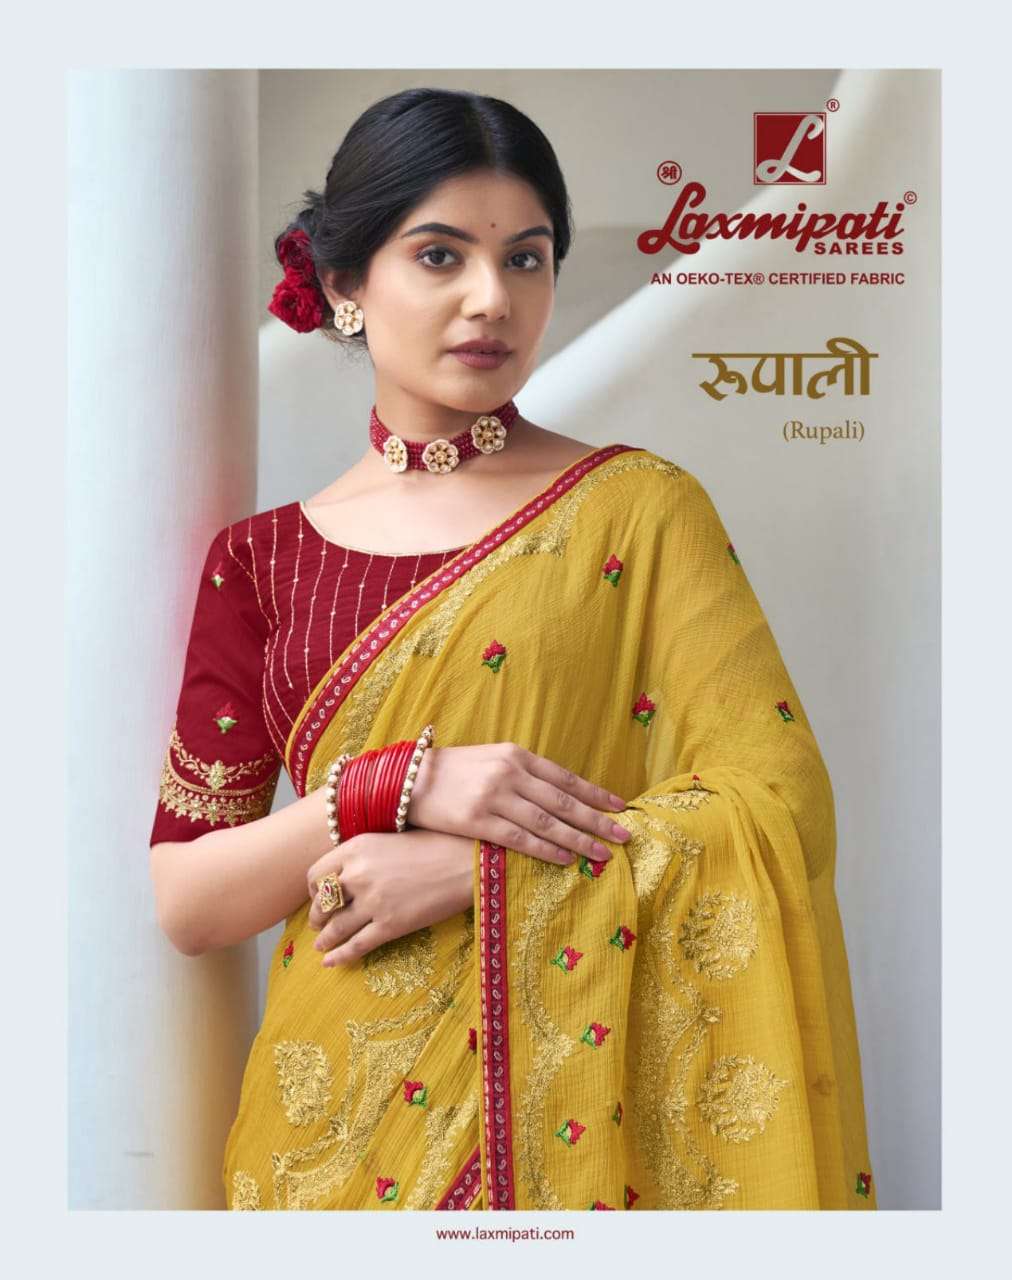 Laxmipati Rupali Fancy with embroidery work saree collection